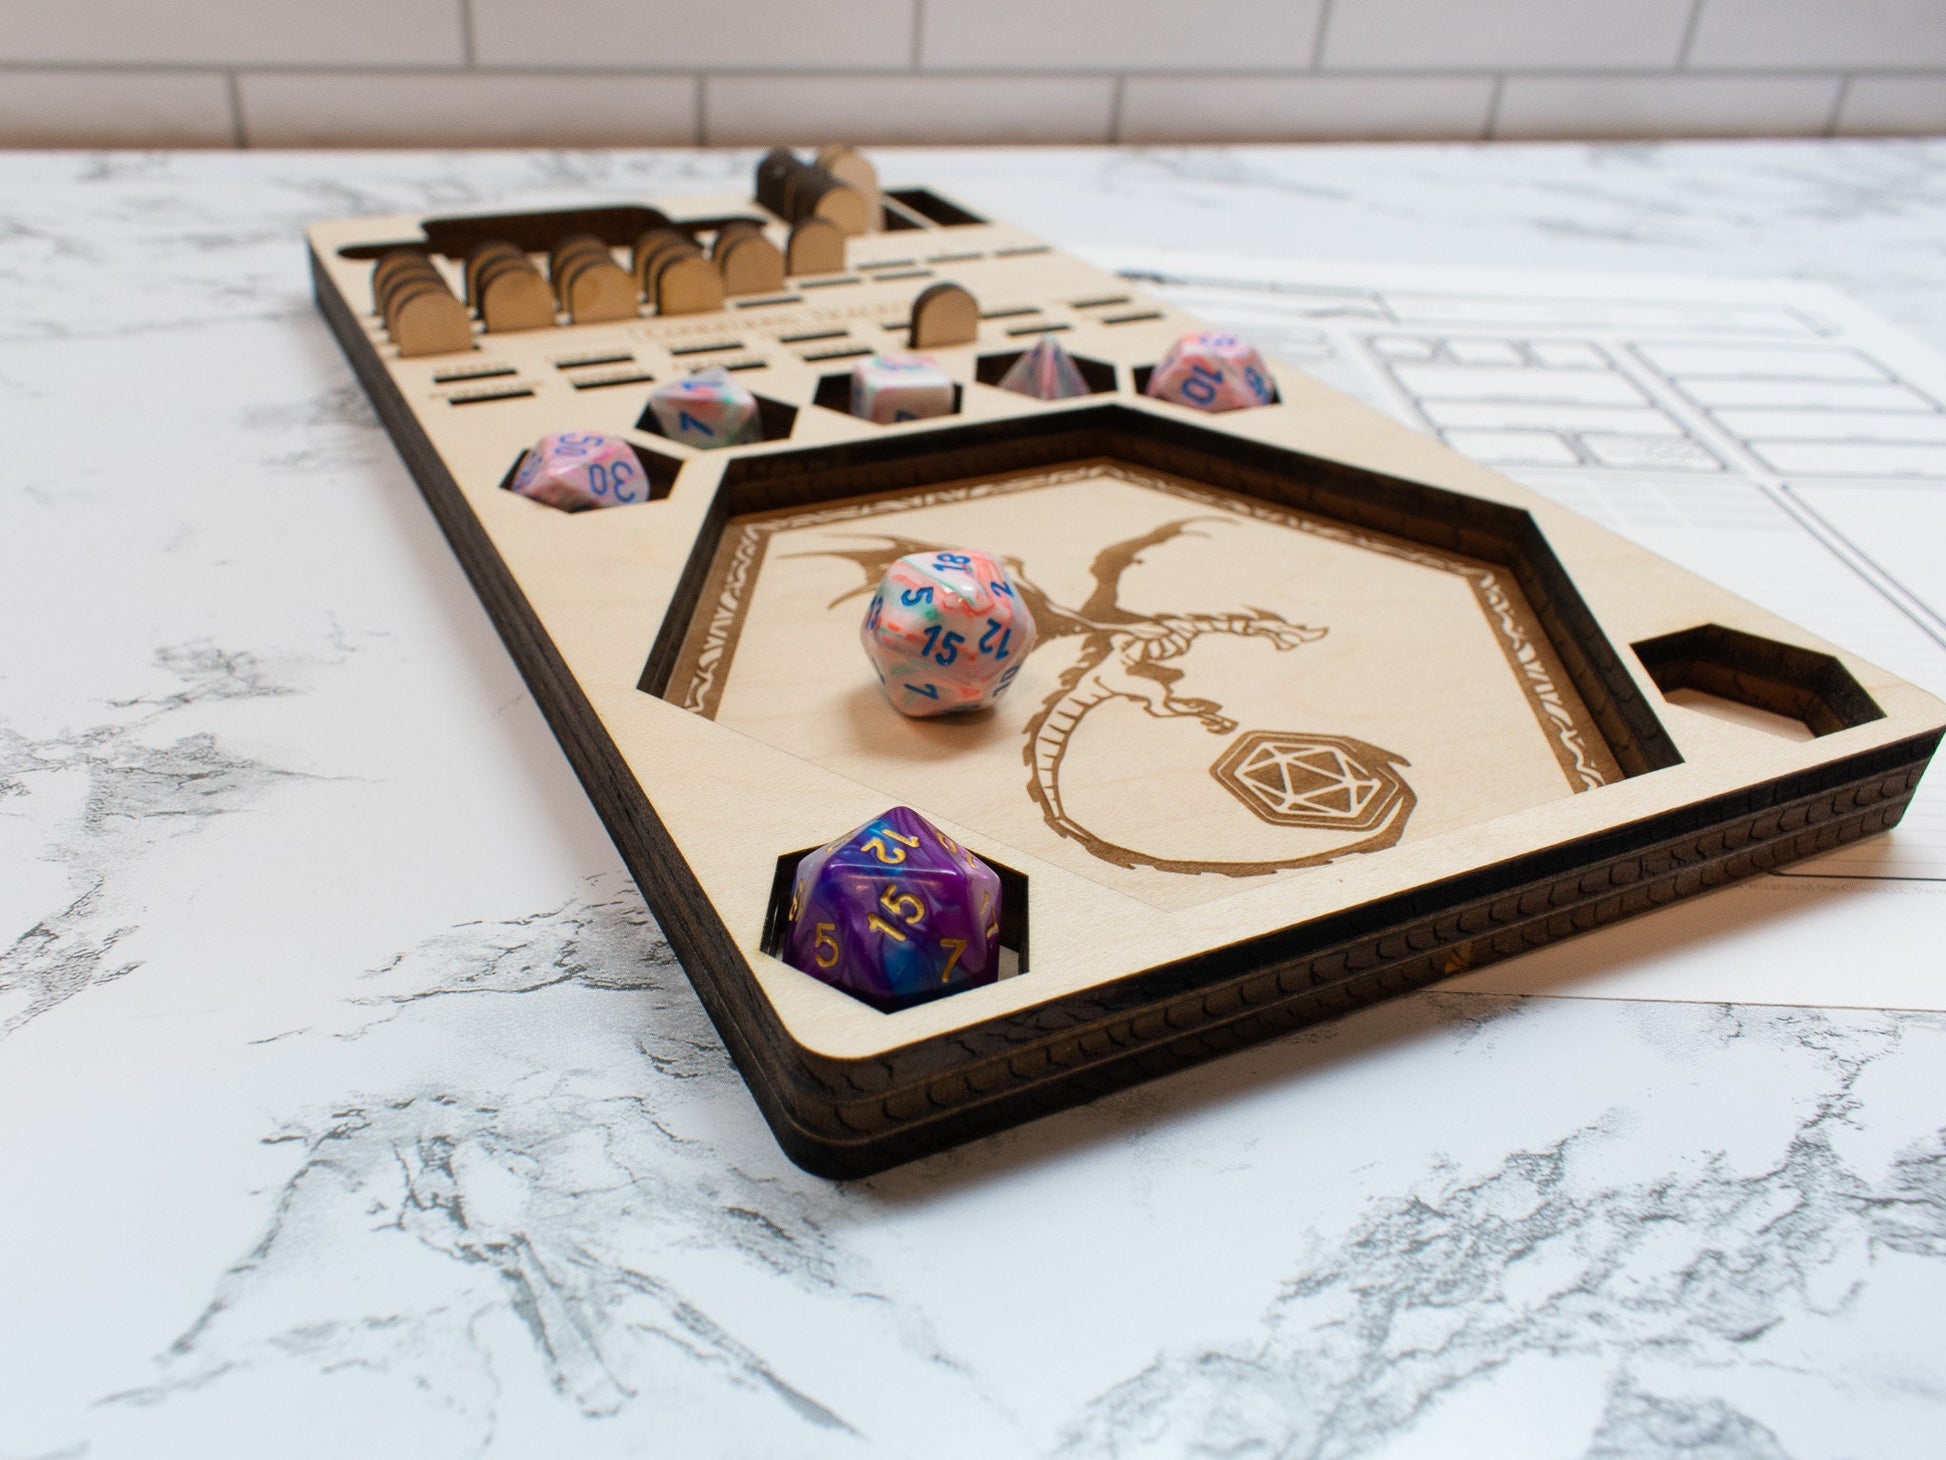 D&D Player's Tray: DnD Dice Tray, Spell Slot Tracker, Conditions Tracker, Phone Holder, and Dice Holder